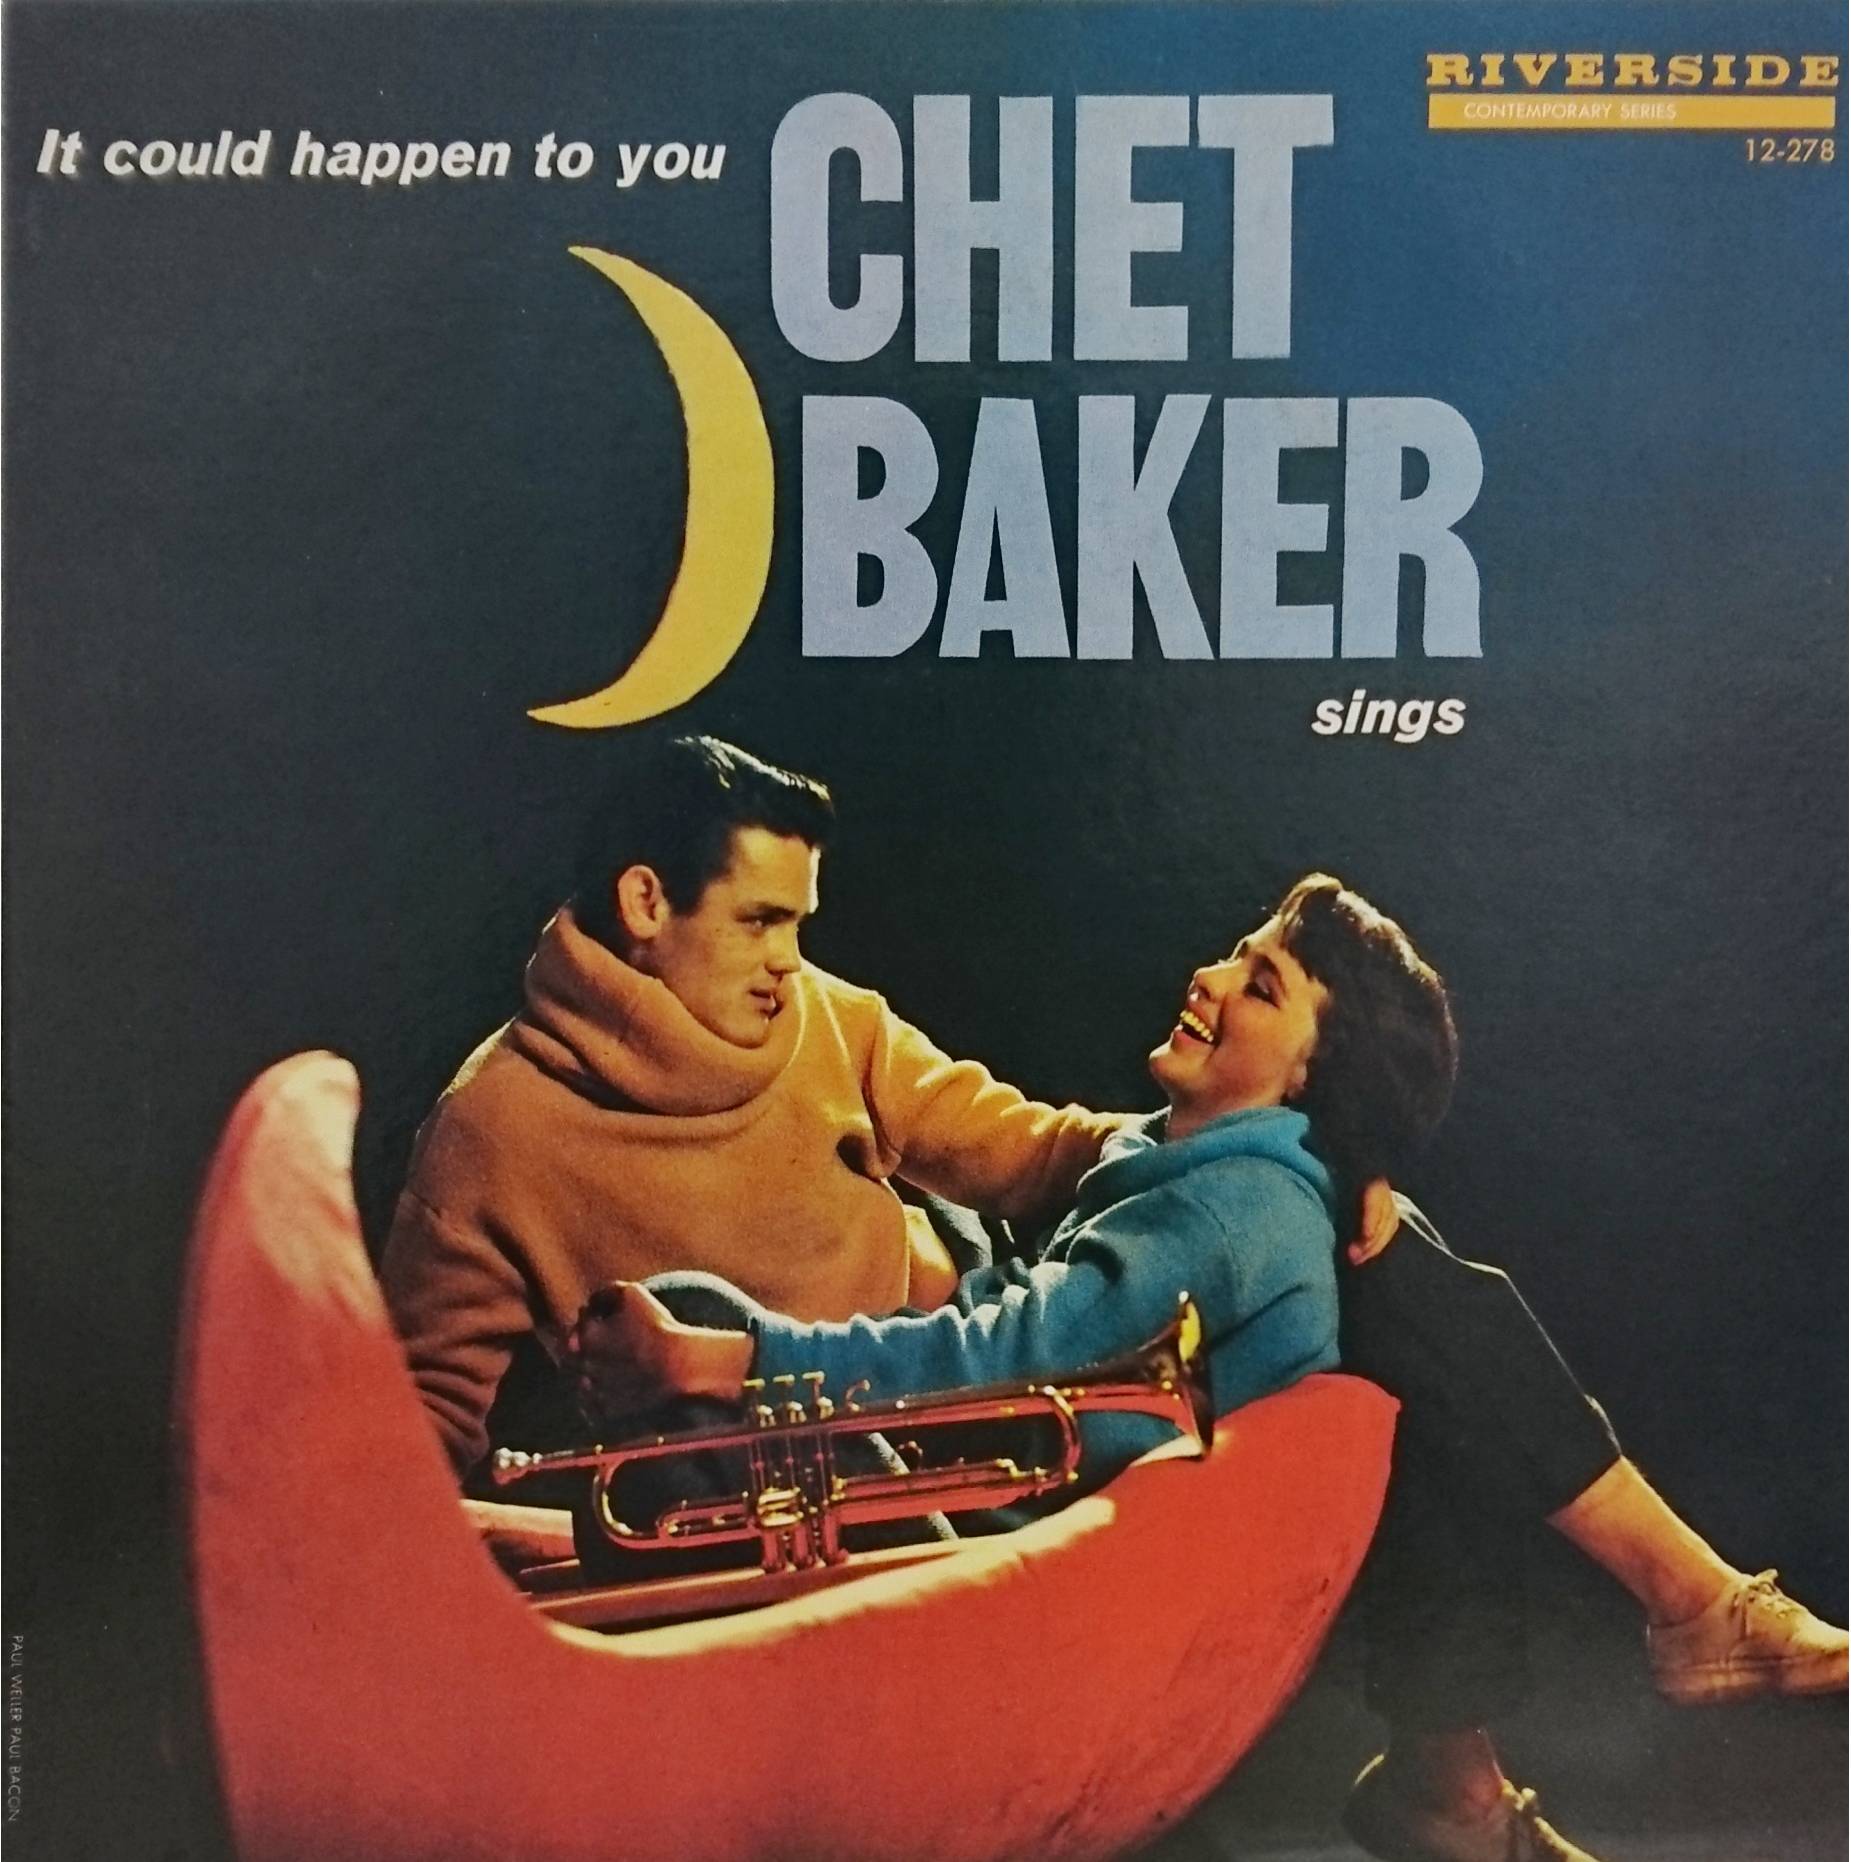 Chet Baker It Could Happen To You Chet Baker Sings チェット ベイカー It Could Happen To You チェット ベイカー シングス 中古レコード通販 買取のアカル レコーズ